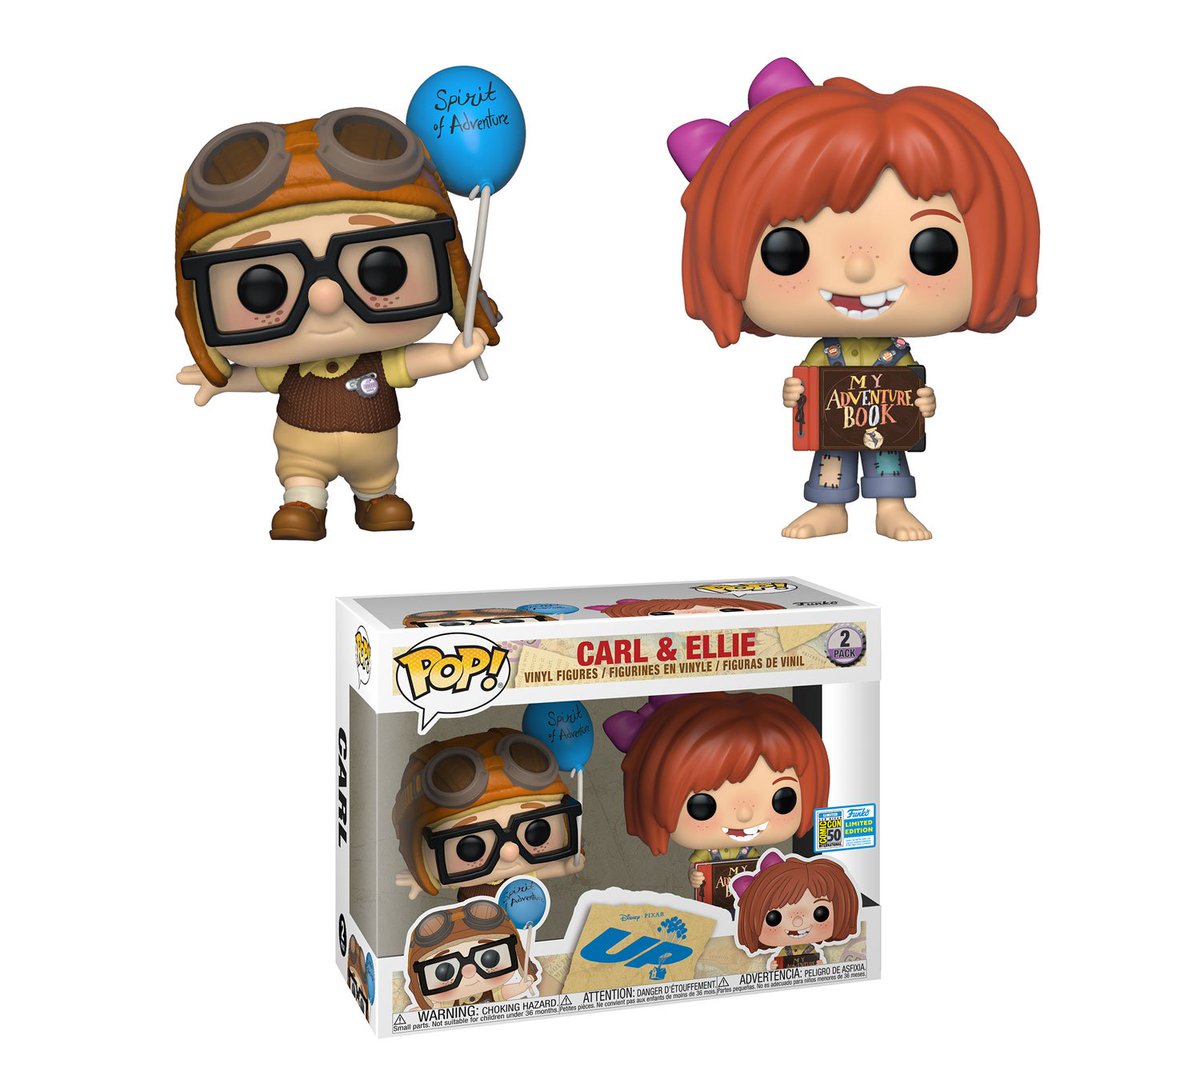 RT & follow @OriginalFunko for a chance to WIN a #SDCC2019 exclusive UP Carl & Ellie Pop! 2-Pack.
#FunkoSDCC #SDCC50